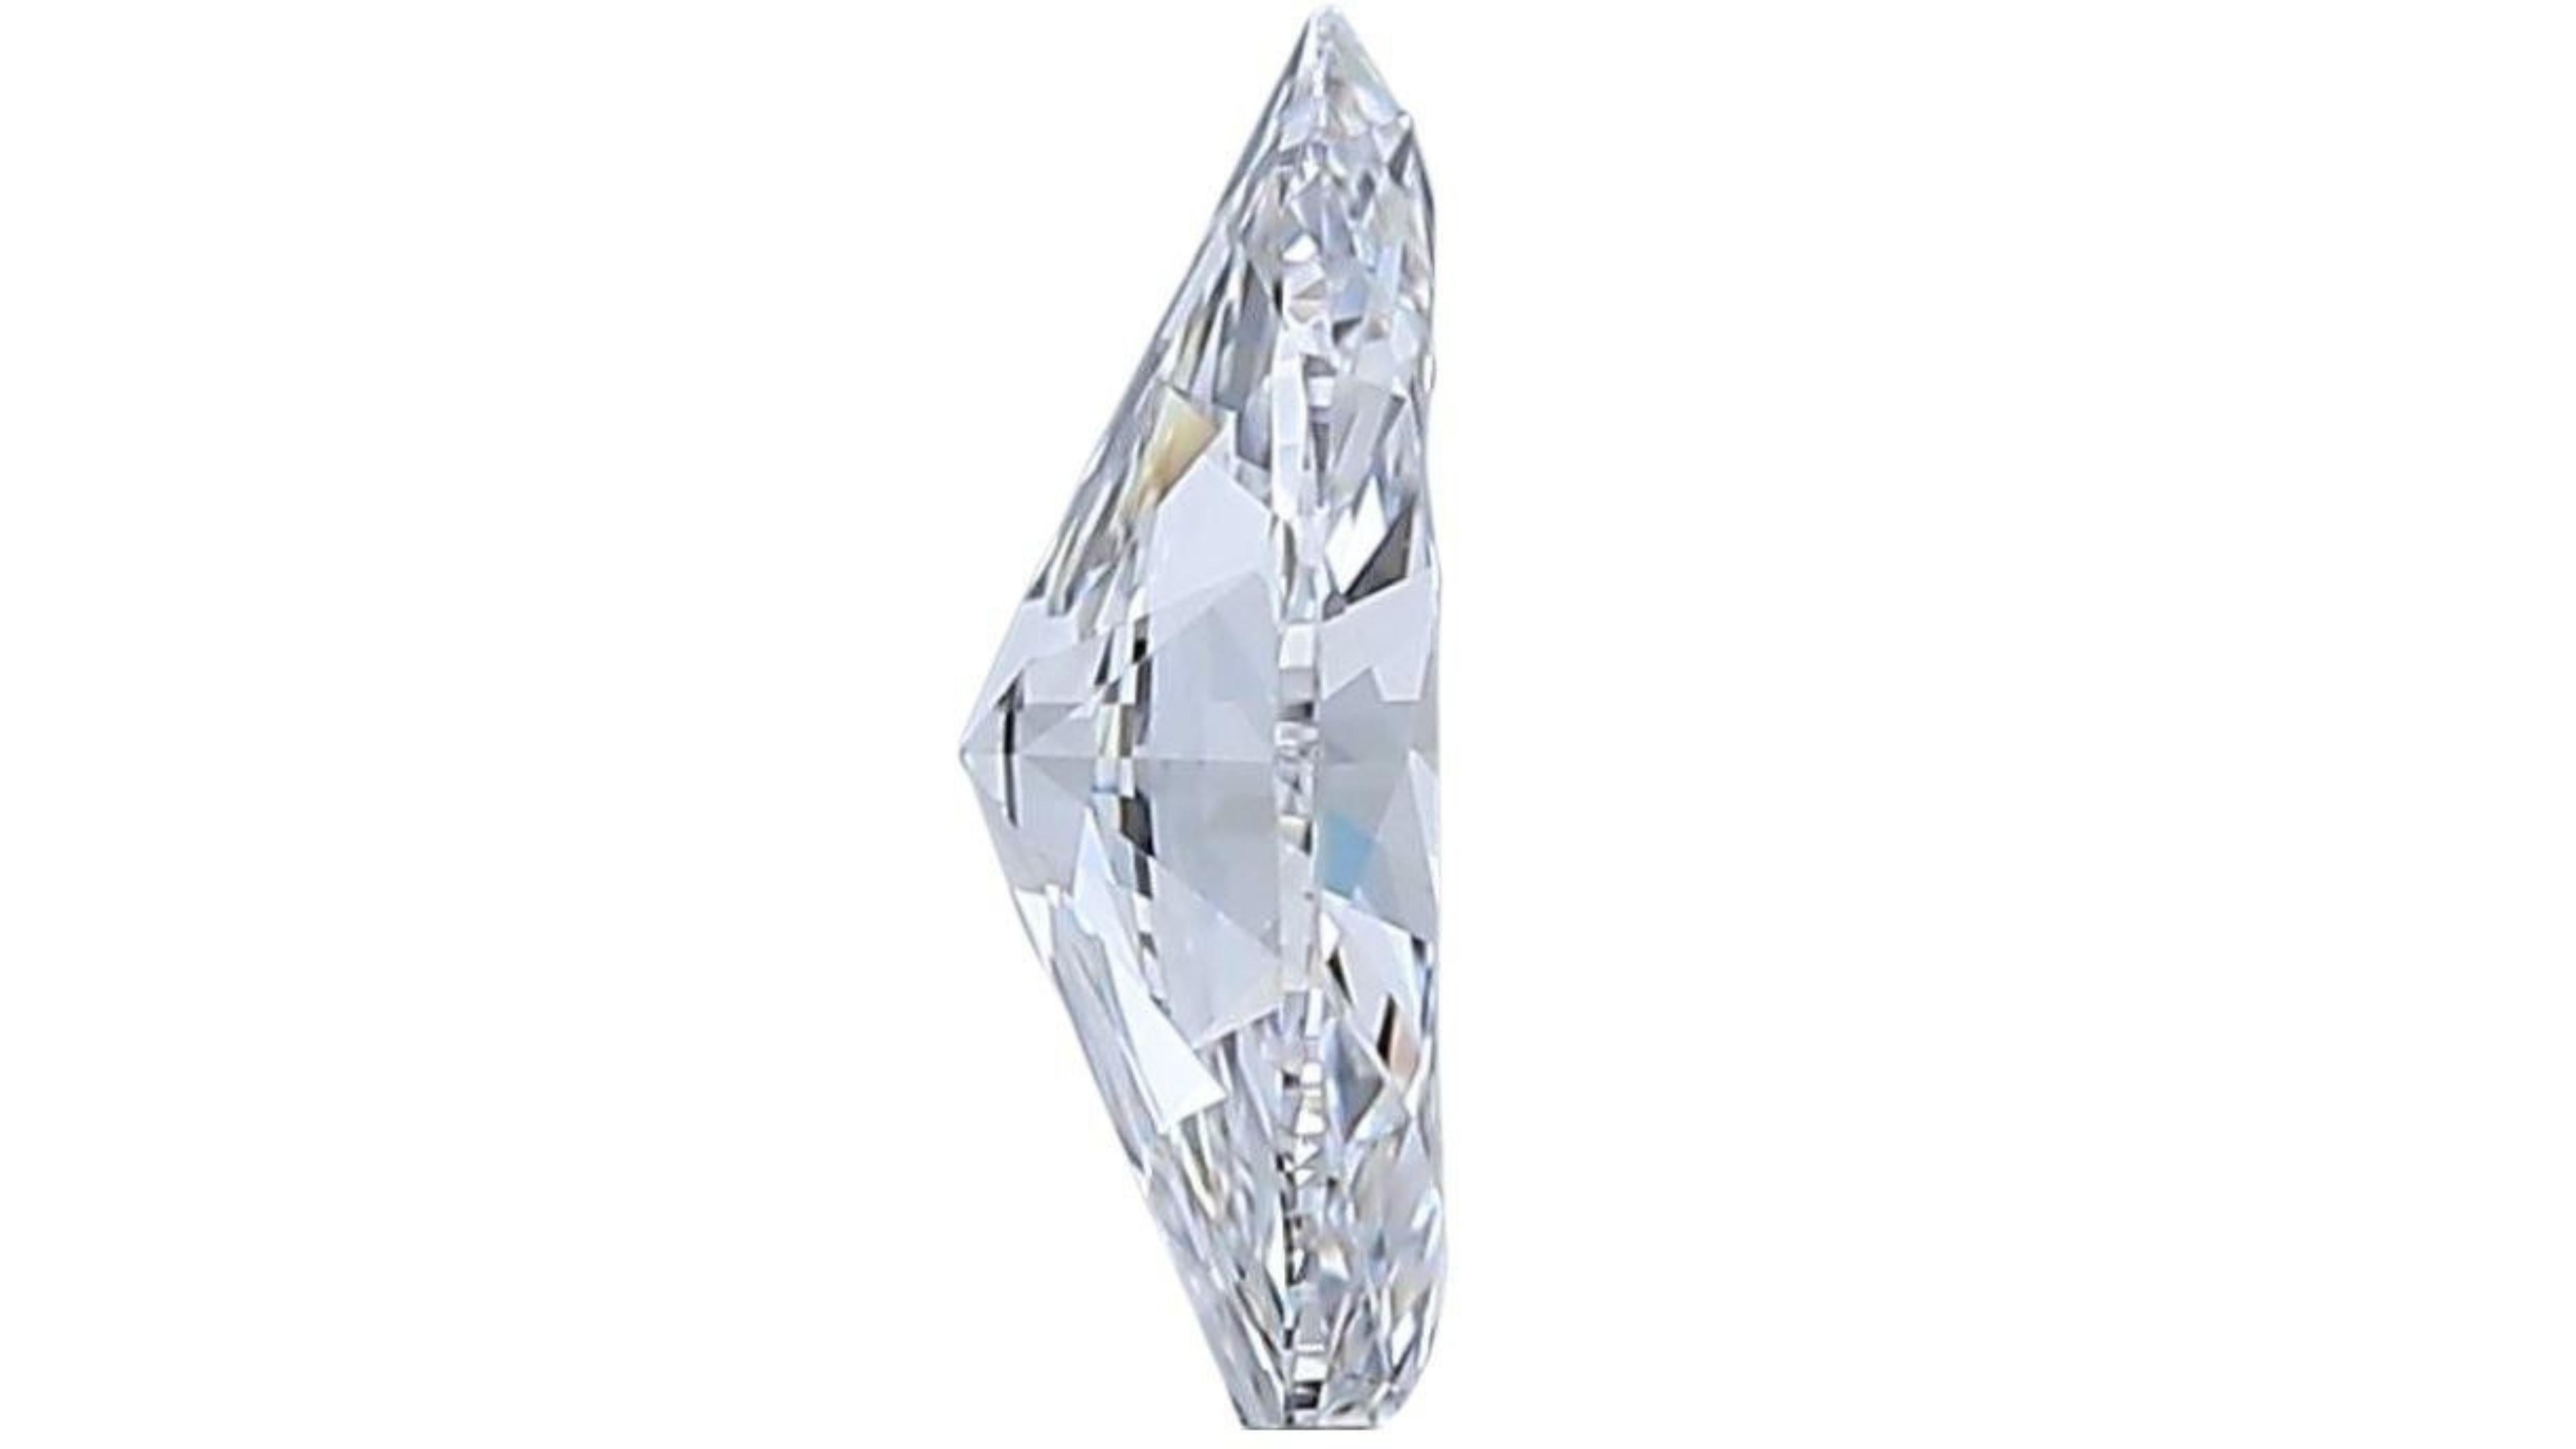 1pc. Shimmering .7 Marquise Cut Natural Diamond For Sale 1